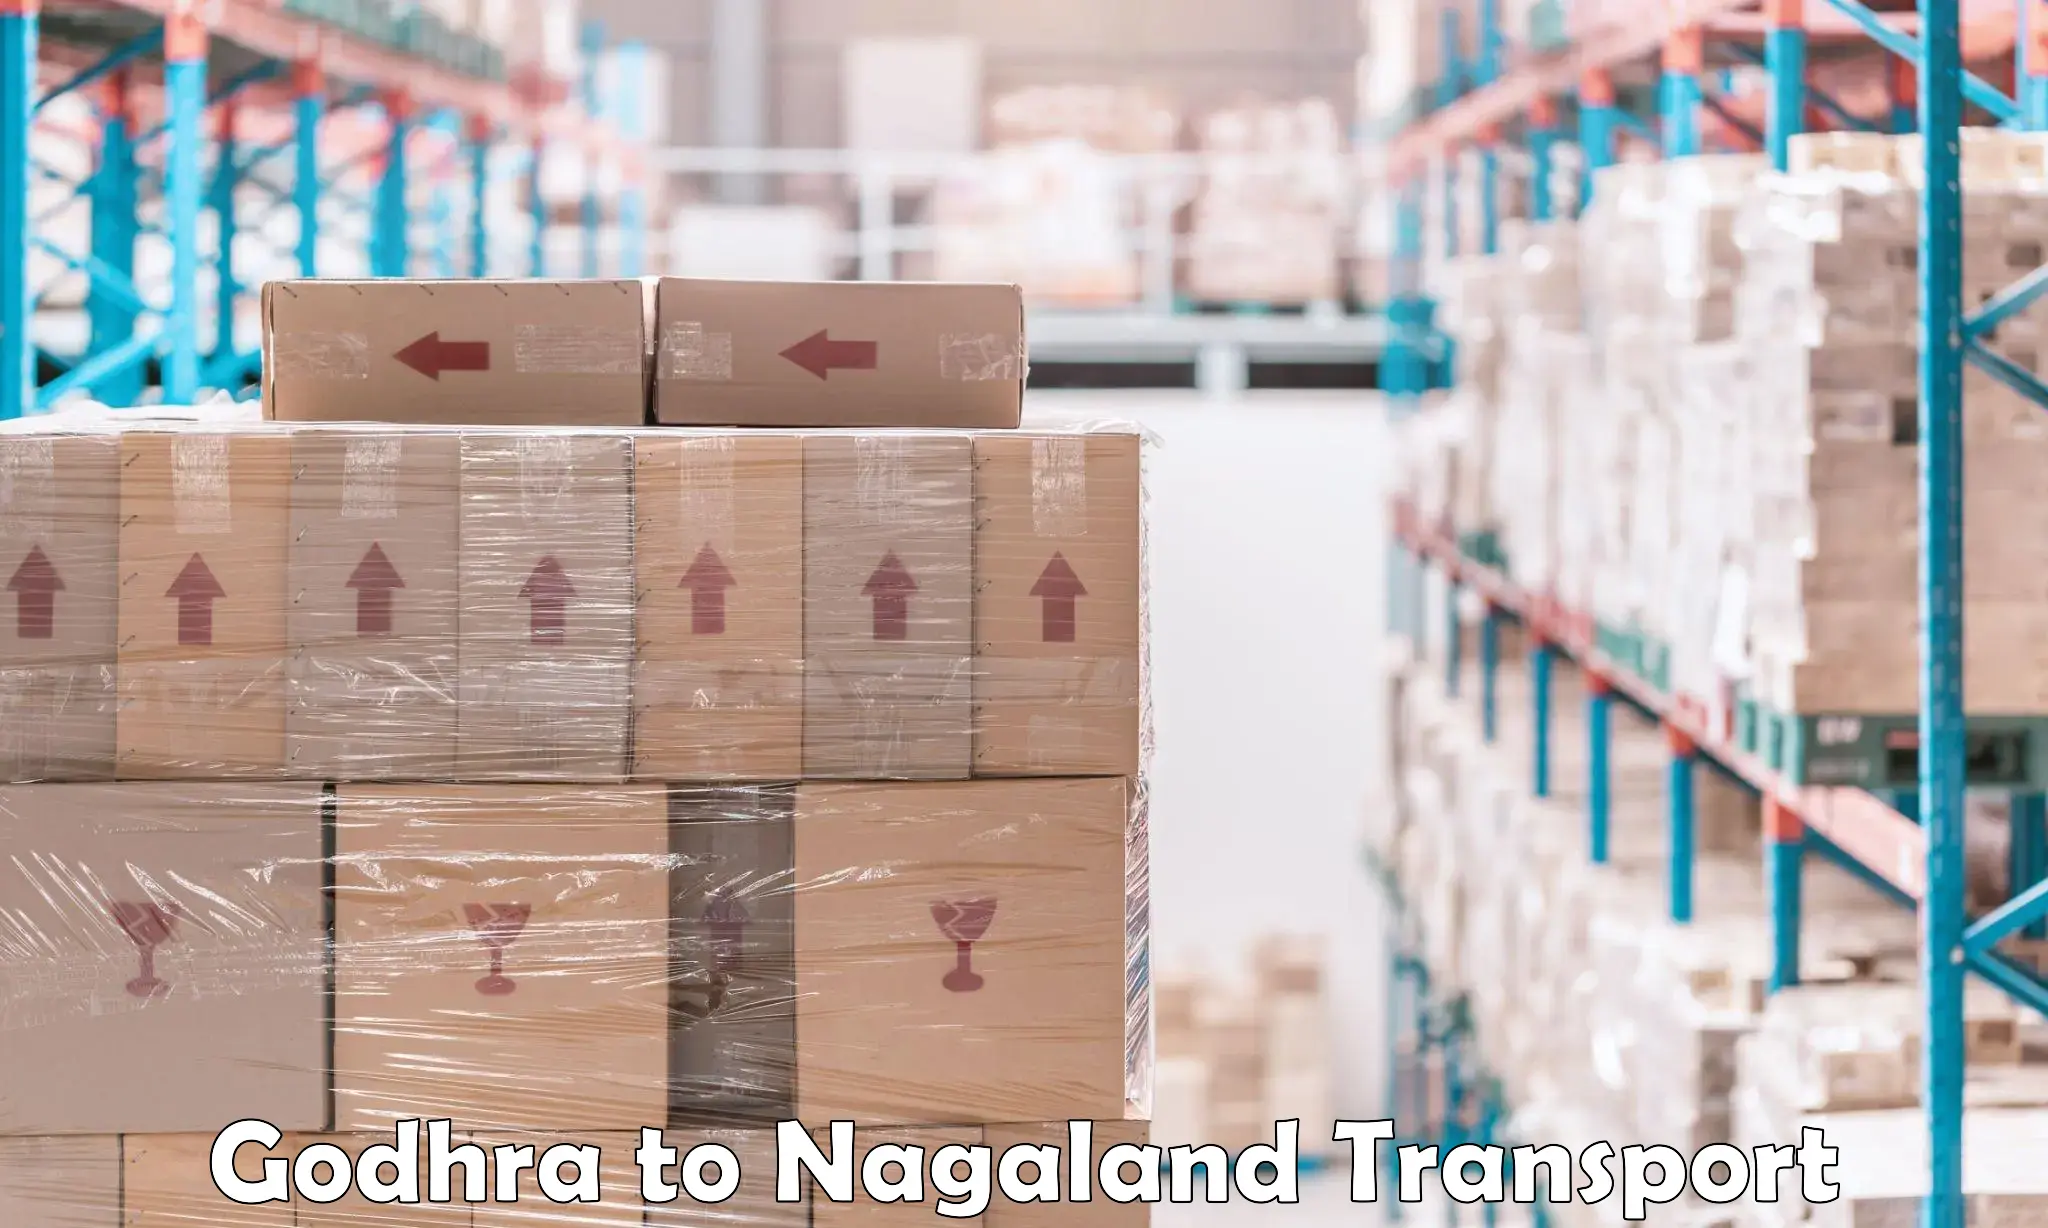 Container transport service Godhra to Nagaland